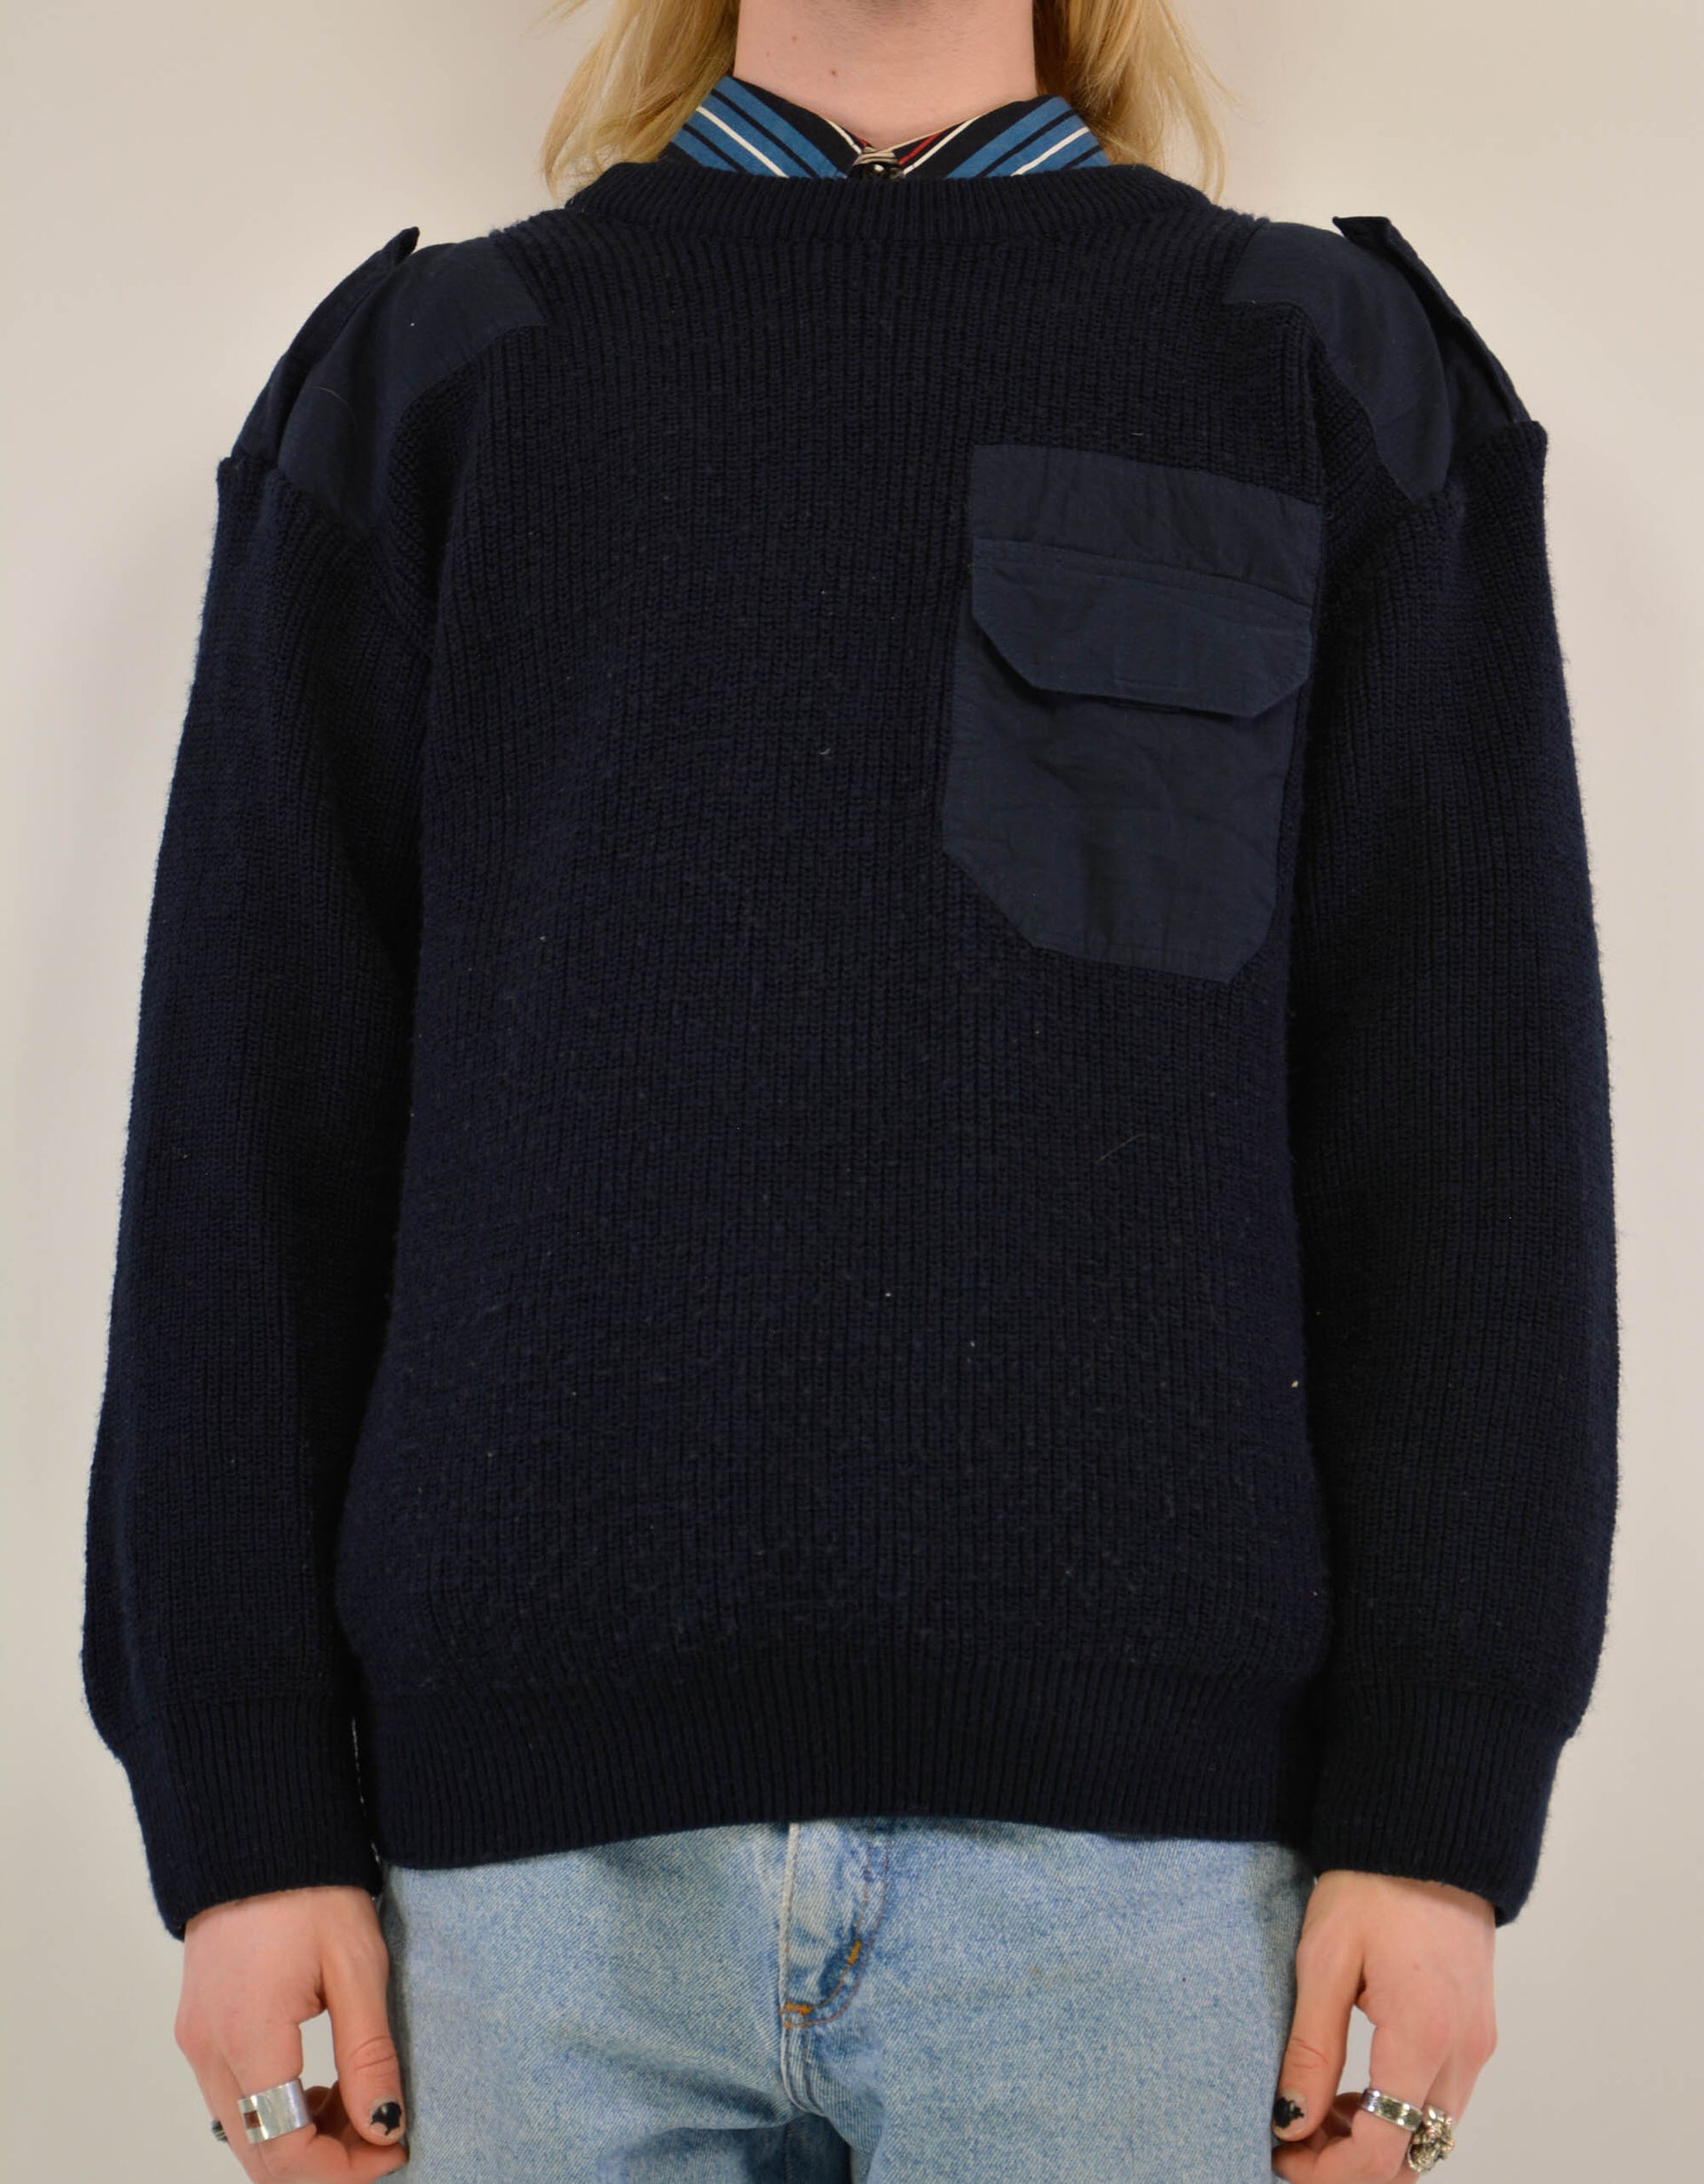 Outdoor sweater - PICKNWEIGHT - VINTAGE KILO STORE